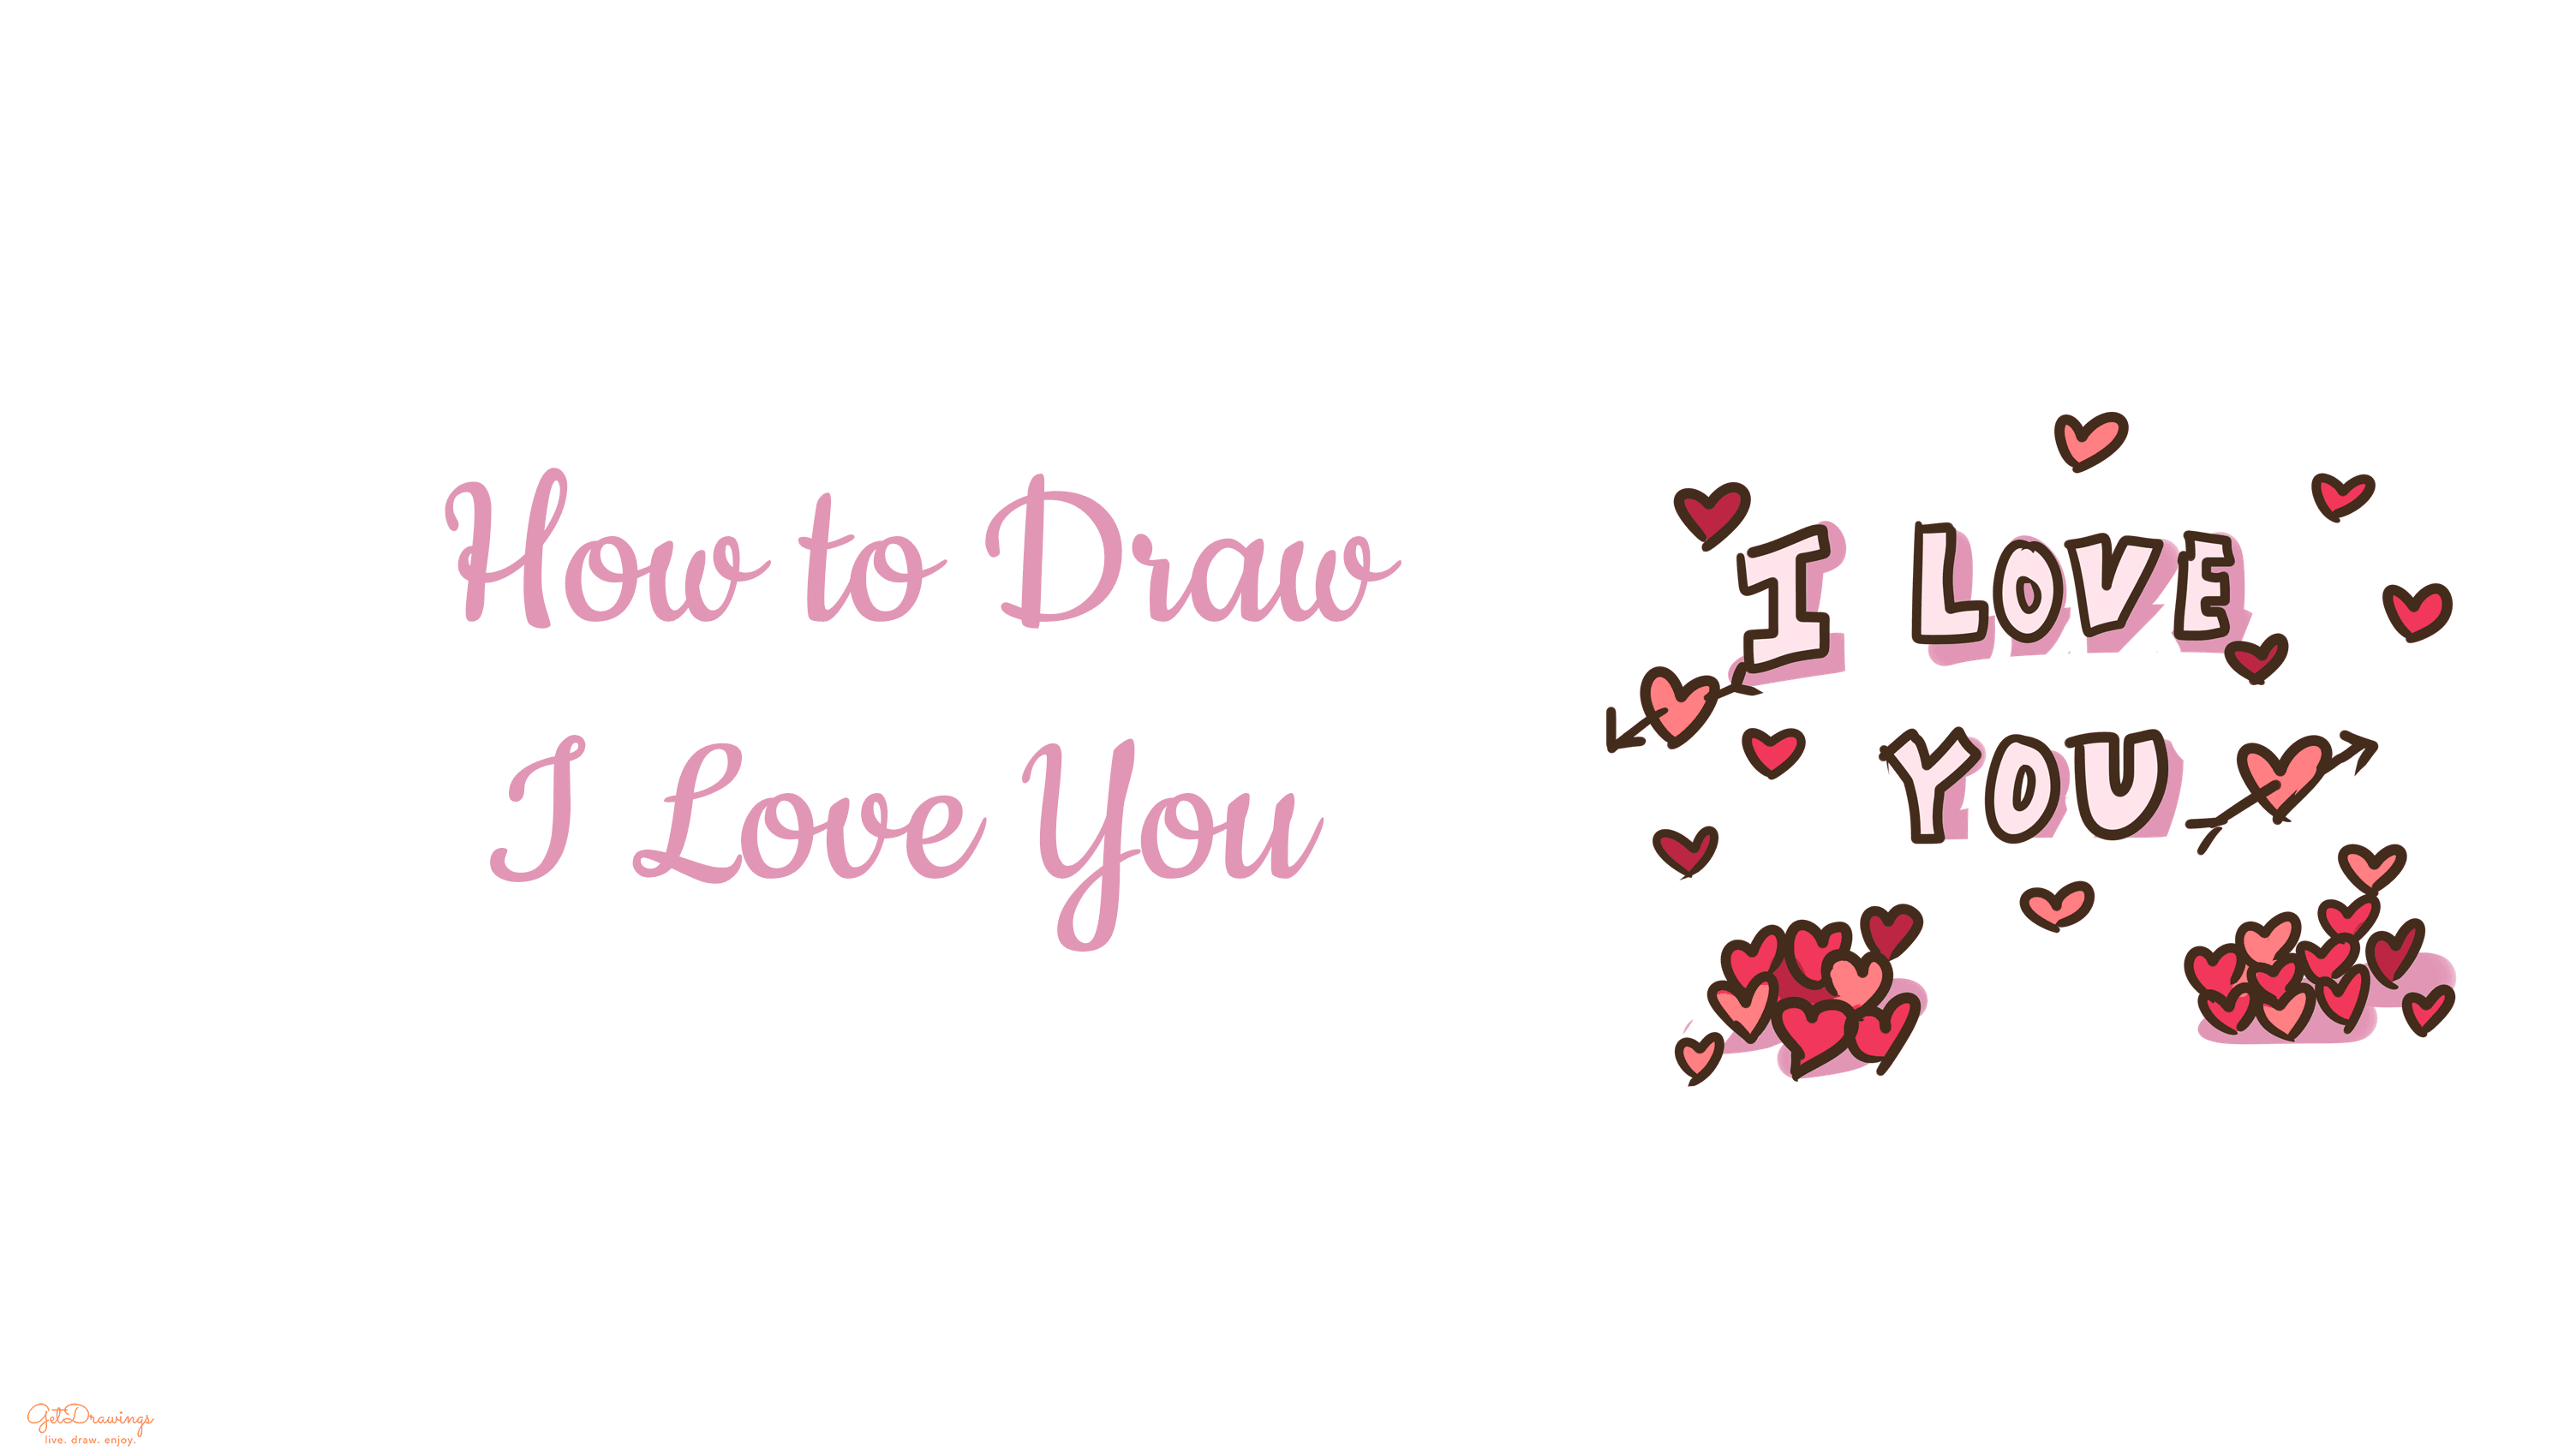 How to draw I Love You